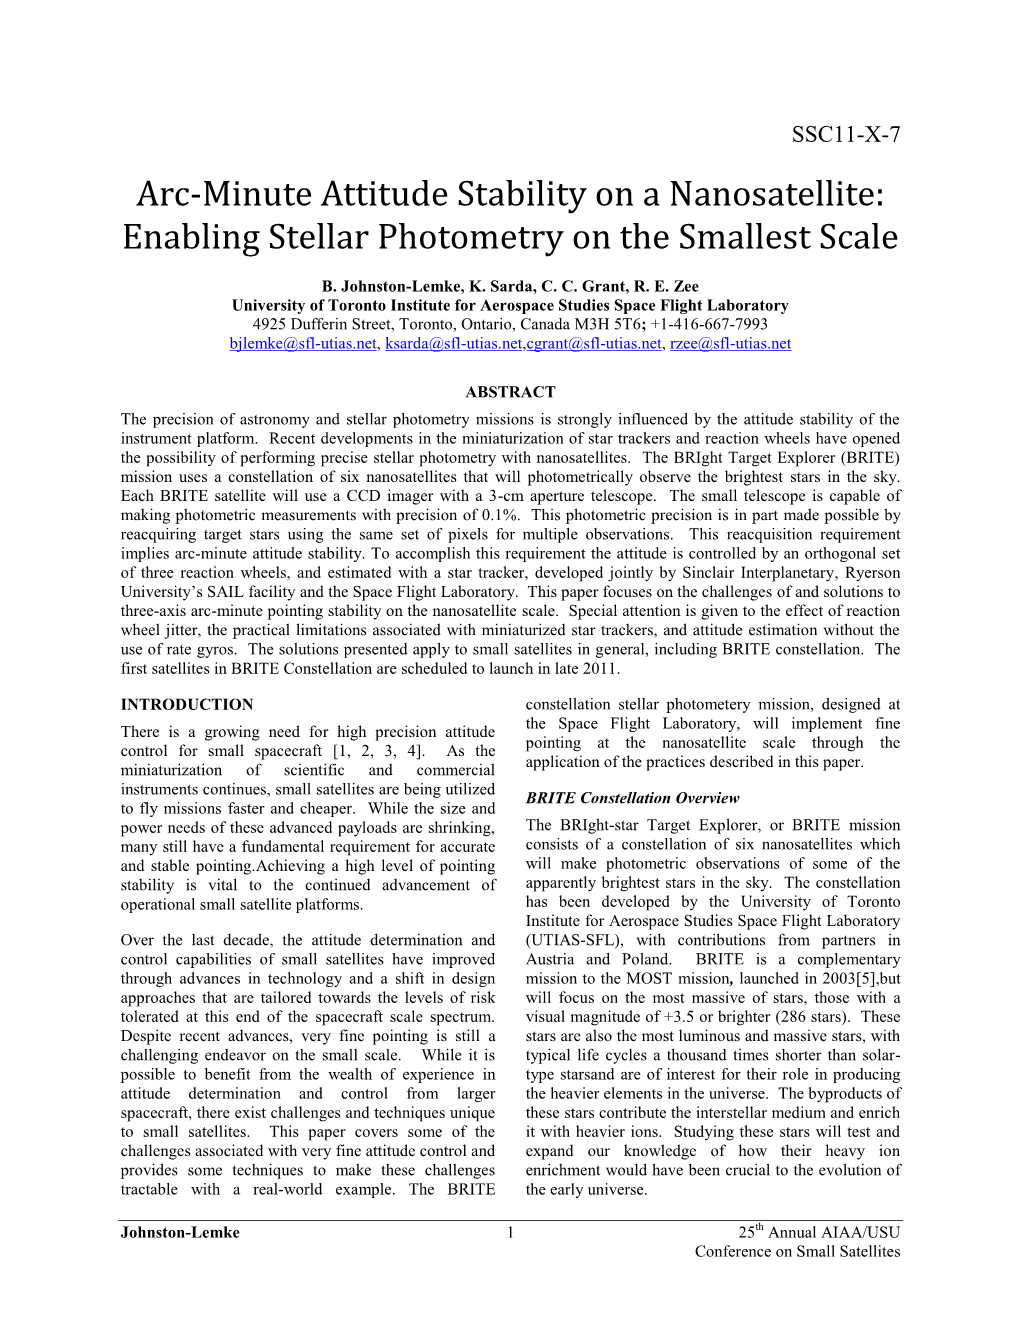 Arc-Minute Attitude Stability on a Nanosatellite: Enabling Stellar Photometry on the Smallest Scale